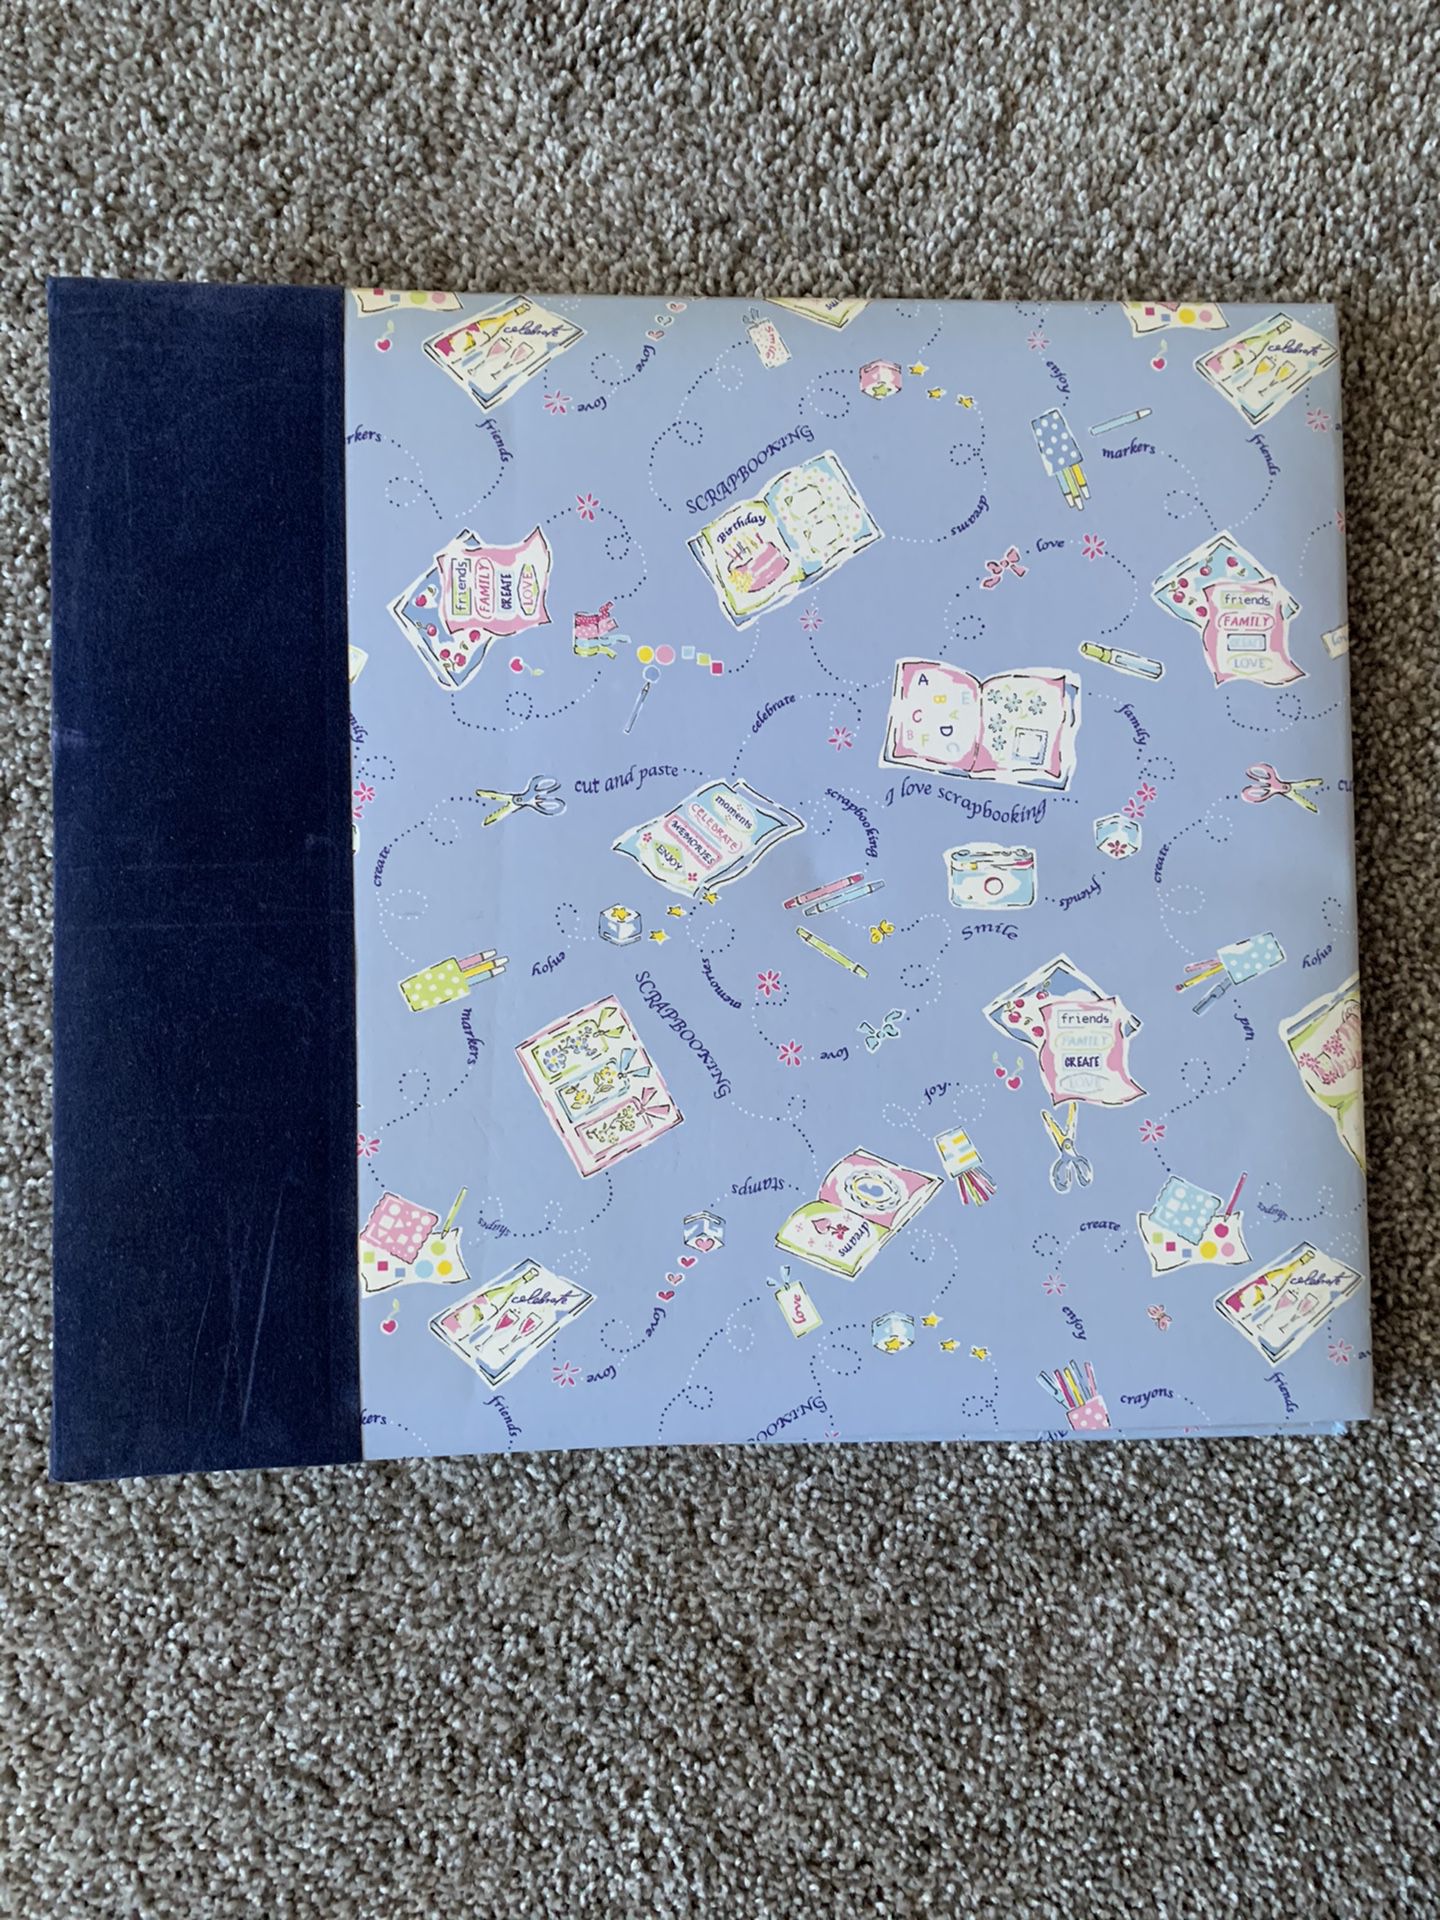 FREE Never used 12”x12” scrapbook